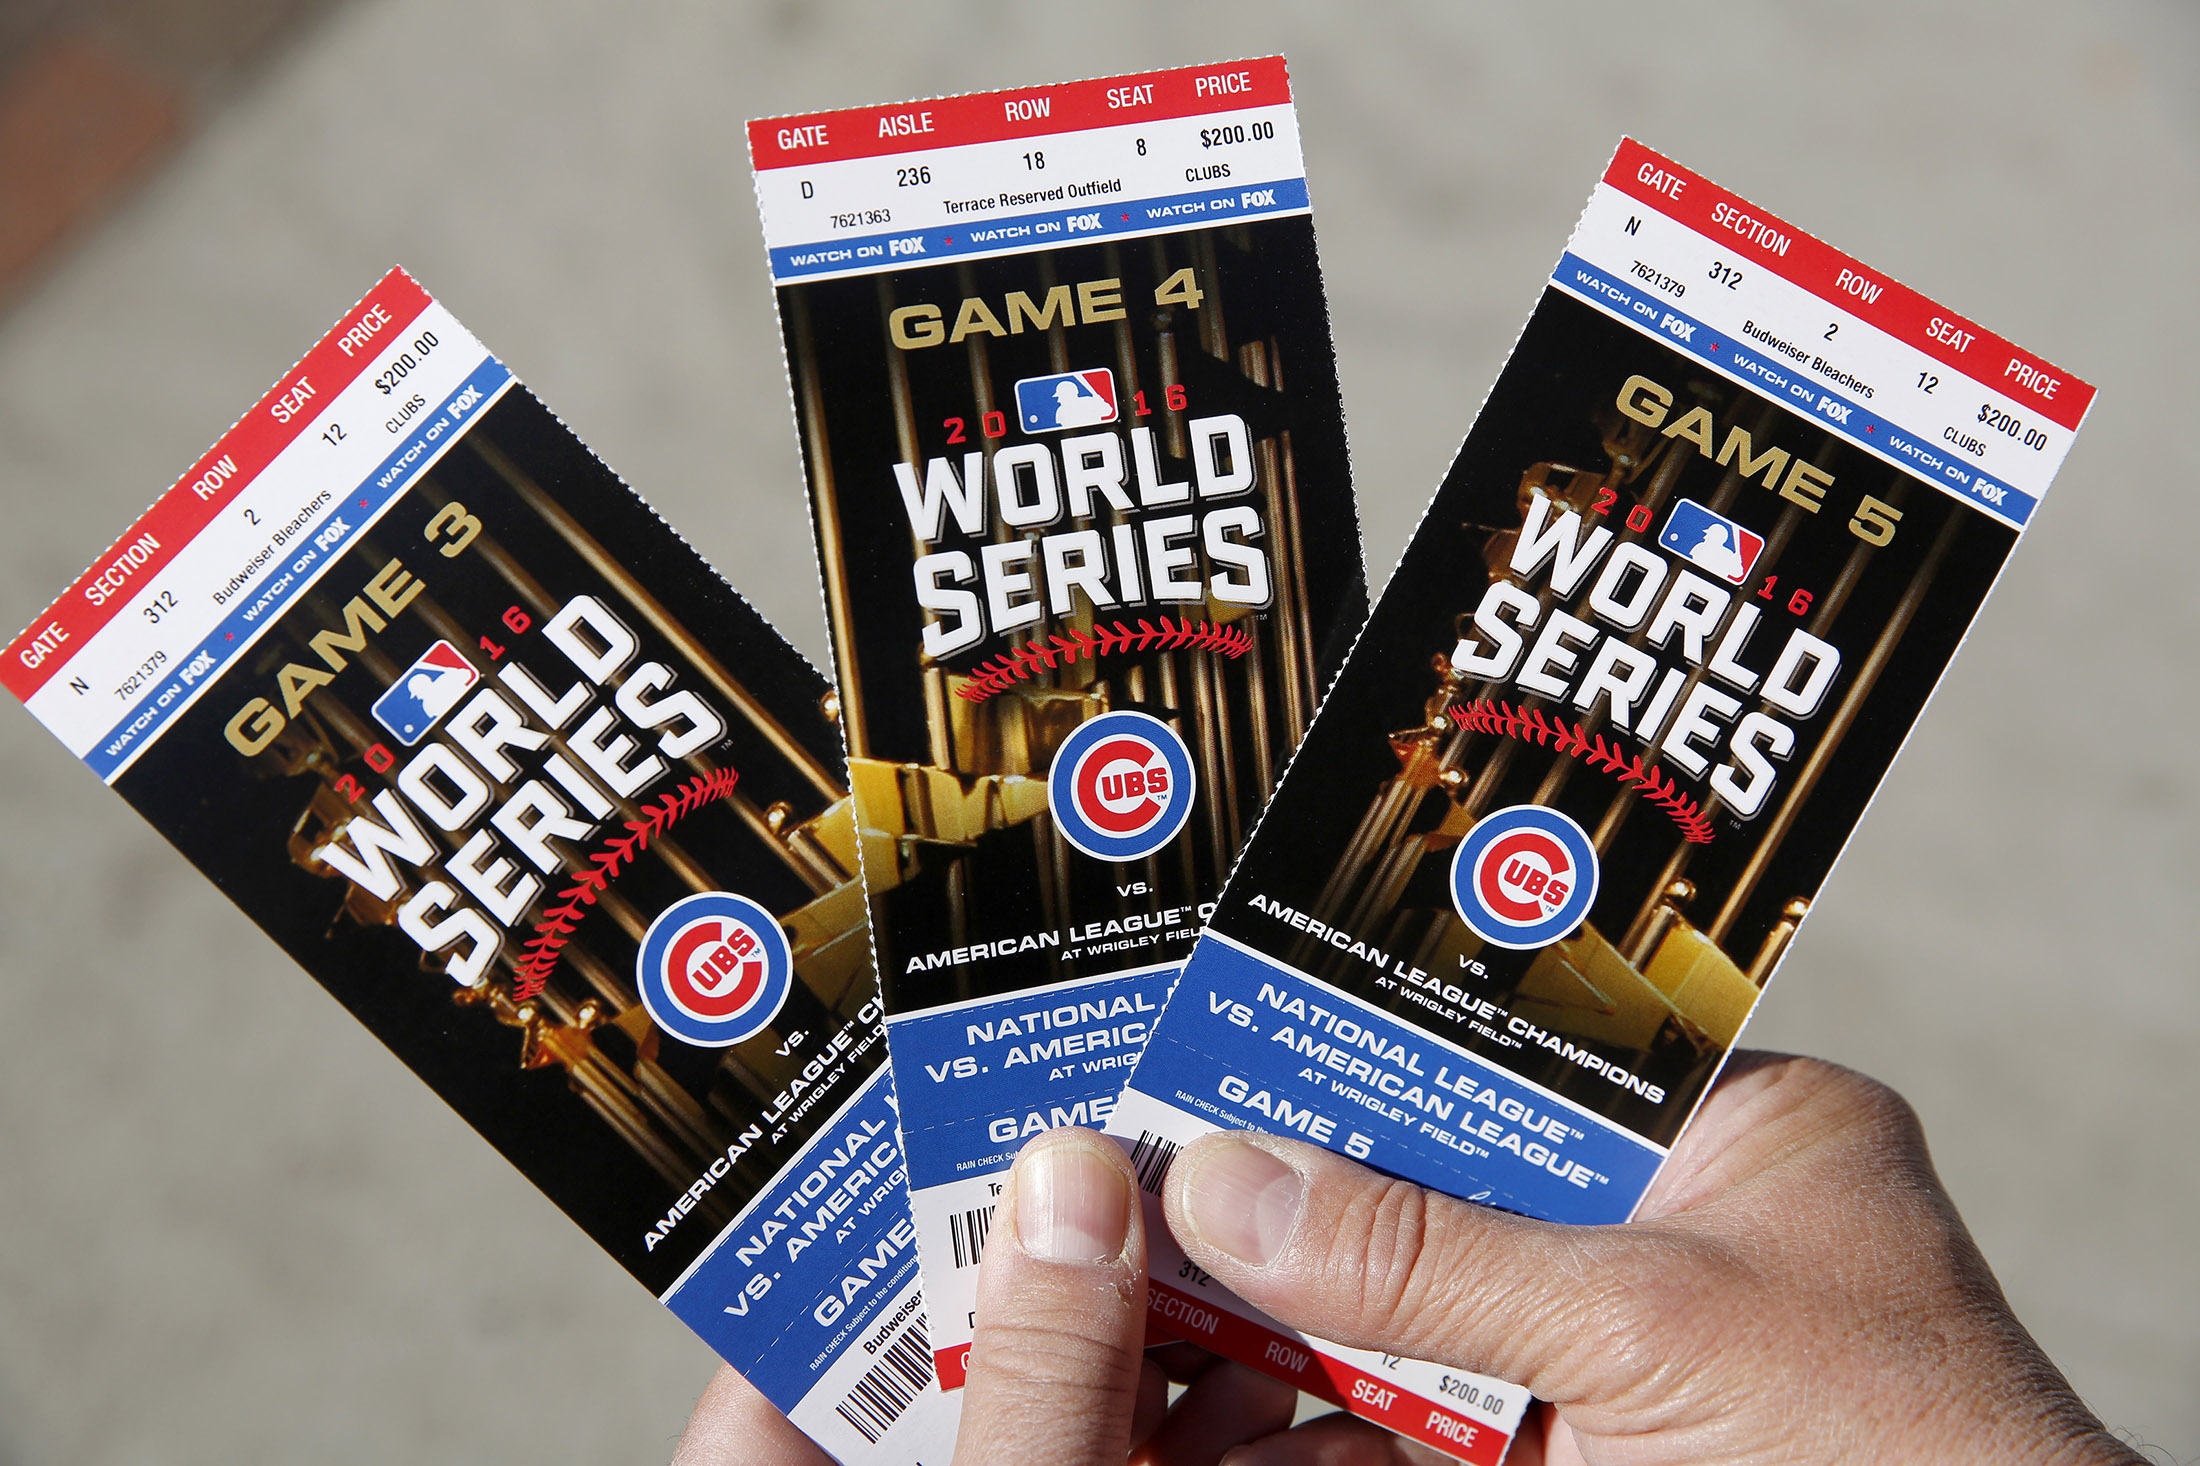 Cubs World Series Tickets Would Be Most Expensive in History - Bloomberg